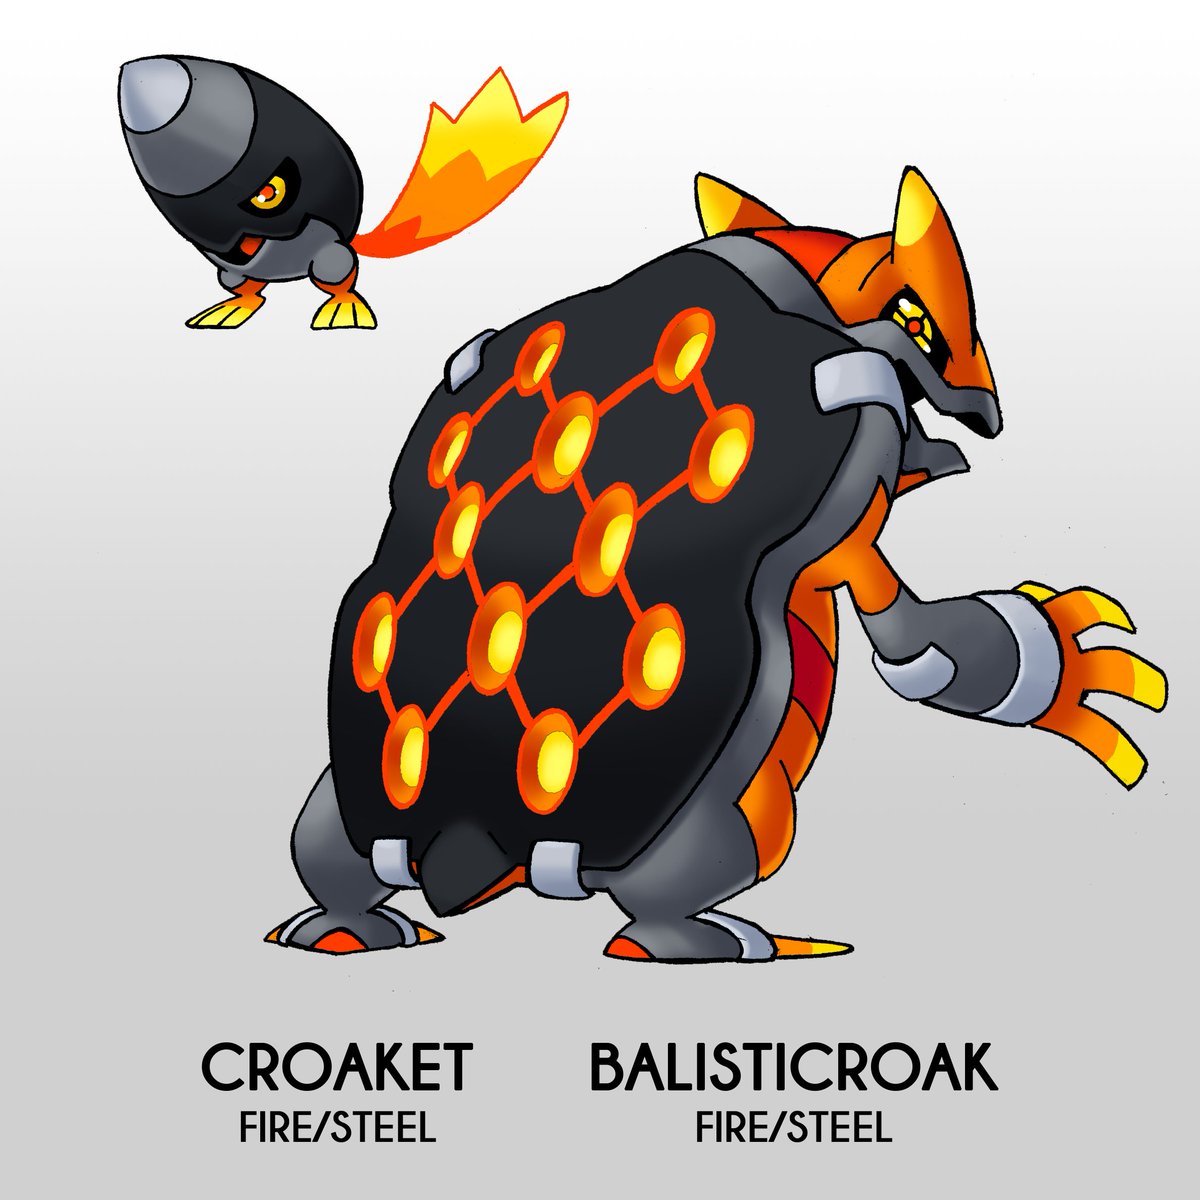 Second fakemon for the Challenge

CROAKET (Fire/Steel) The rocket pokemon
BAISTICROAK (Fire/Steel) The bombing pokemon

They are based on the Suriname Frog and ICBMs